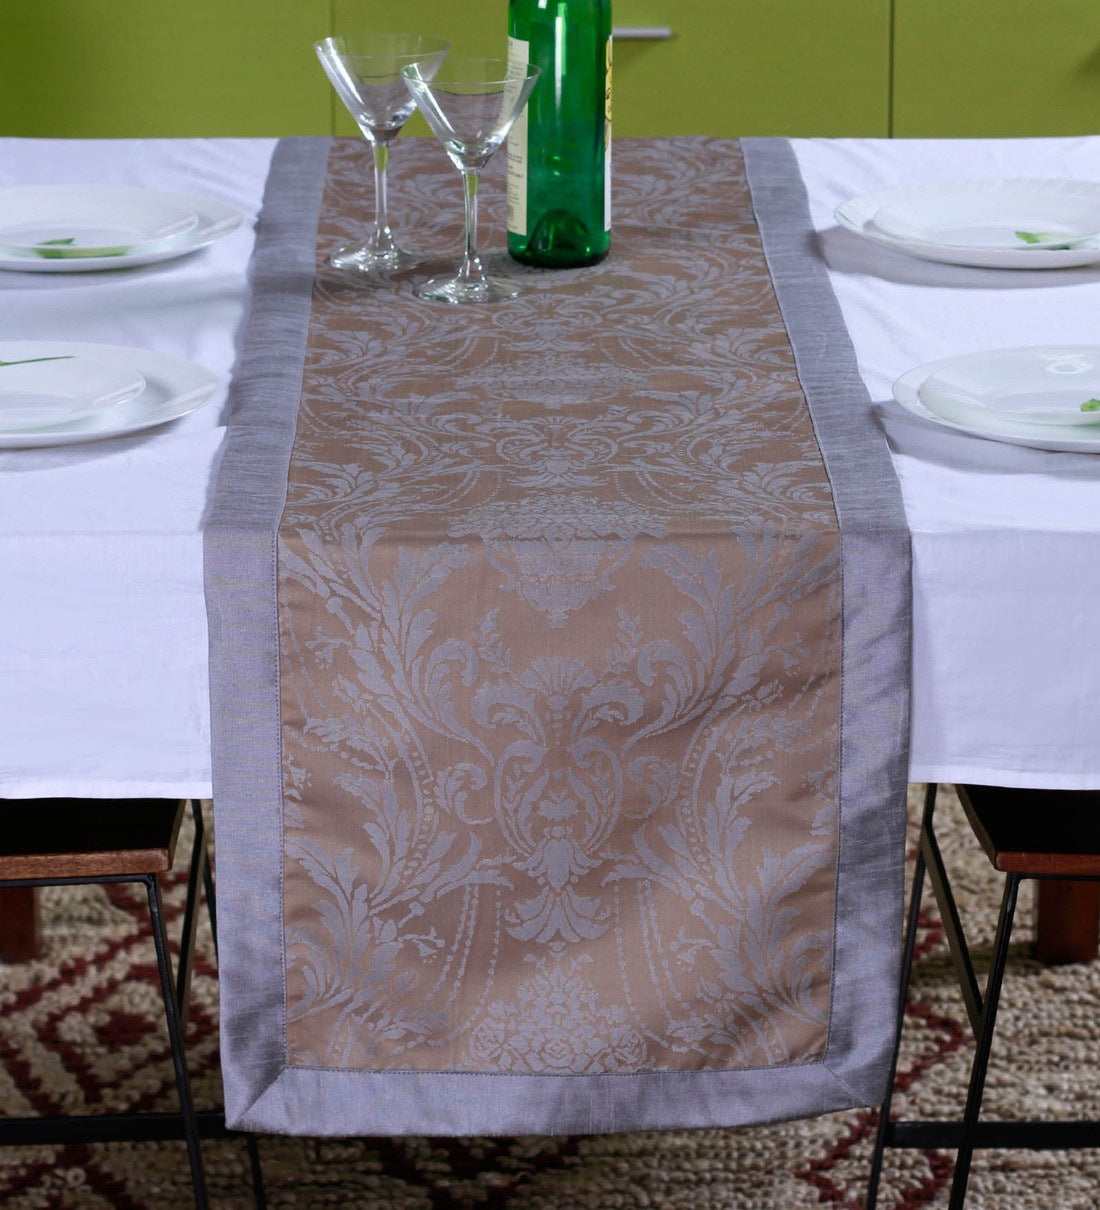 Lushomes Natural Pattern 4 Jacquard Table Runner with High Quality Polyester Border (Size: 16"x72"), single piece - Lushomes